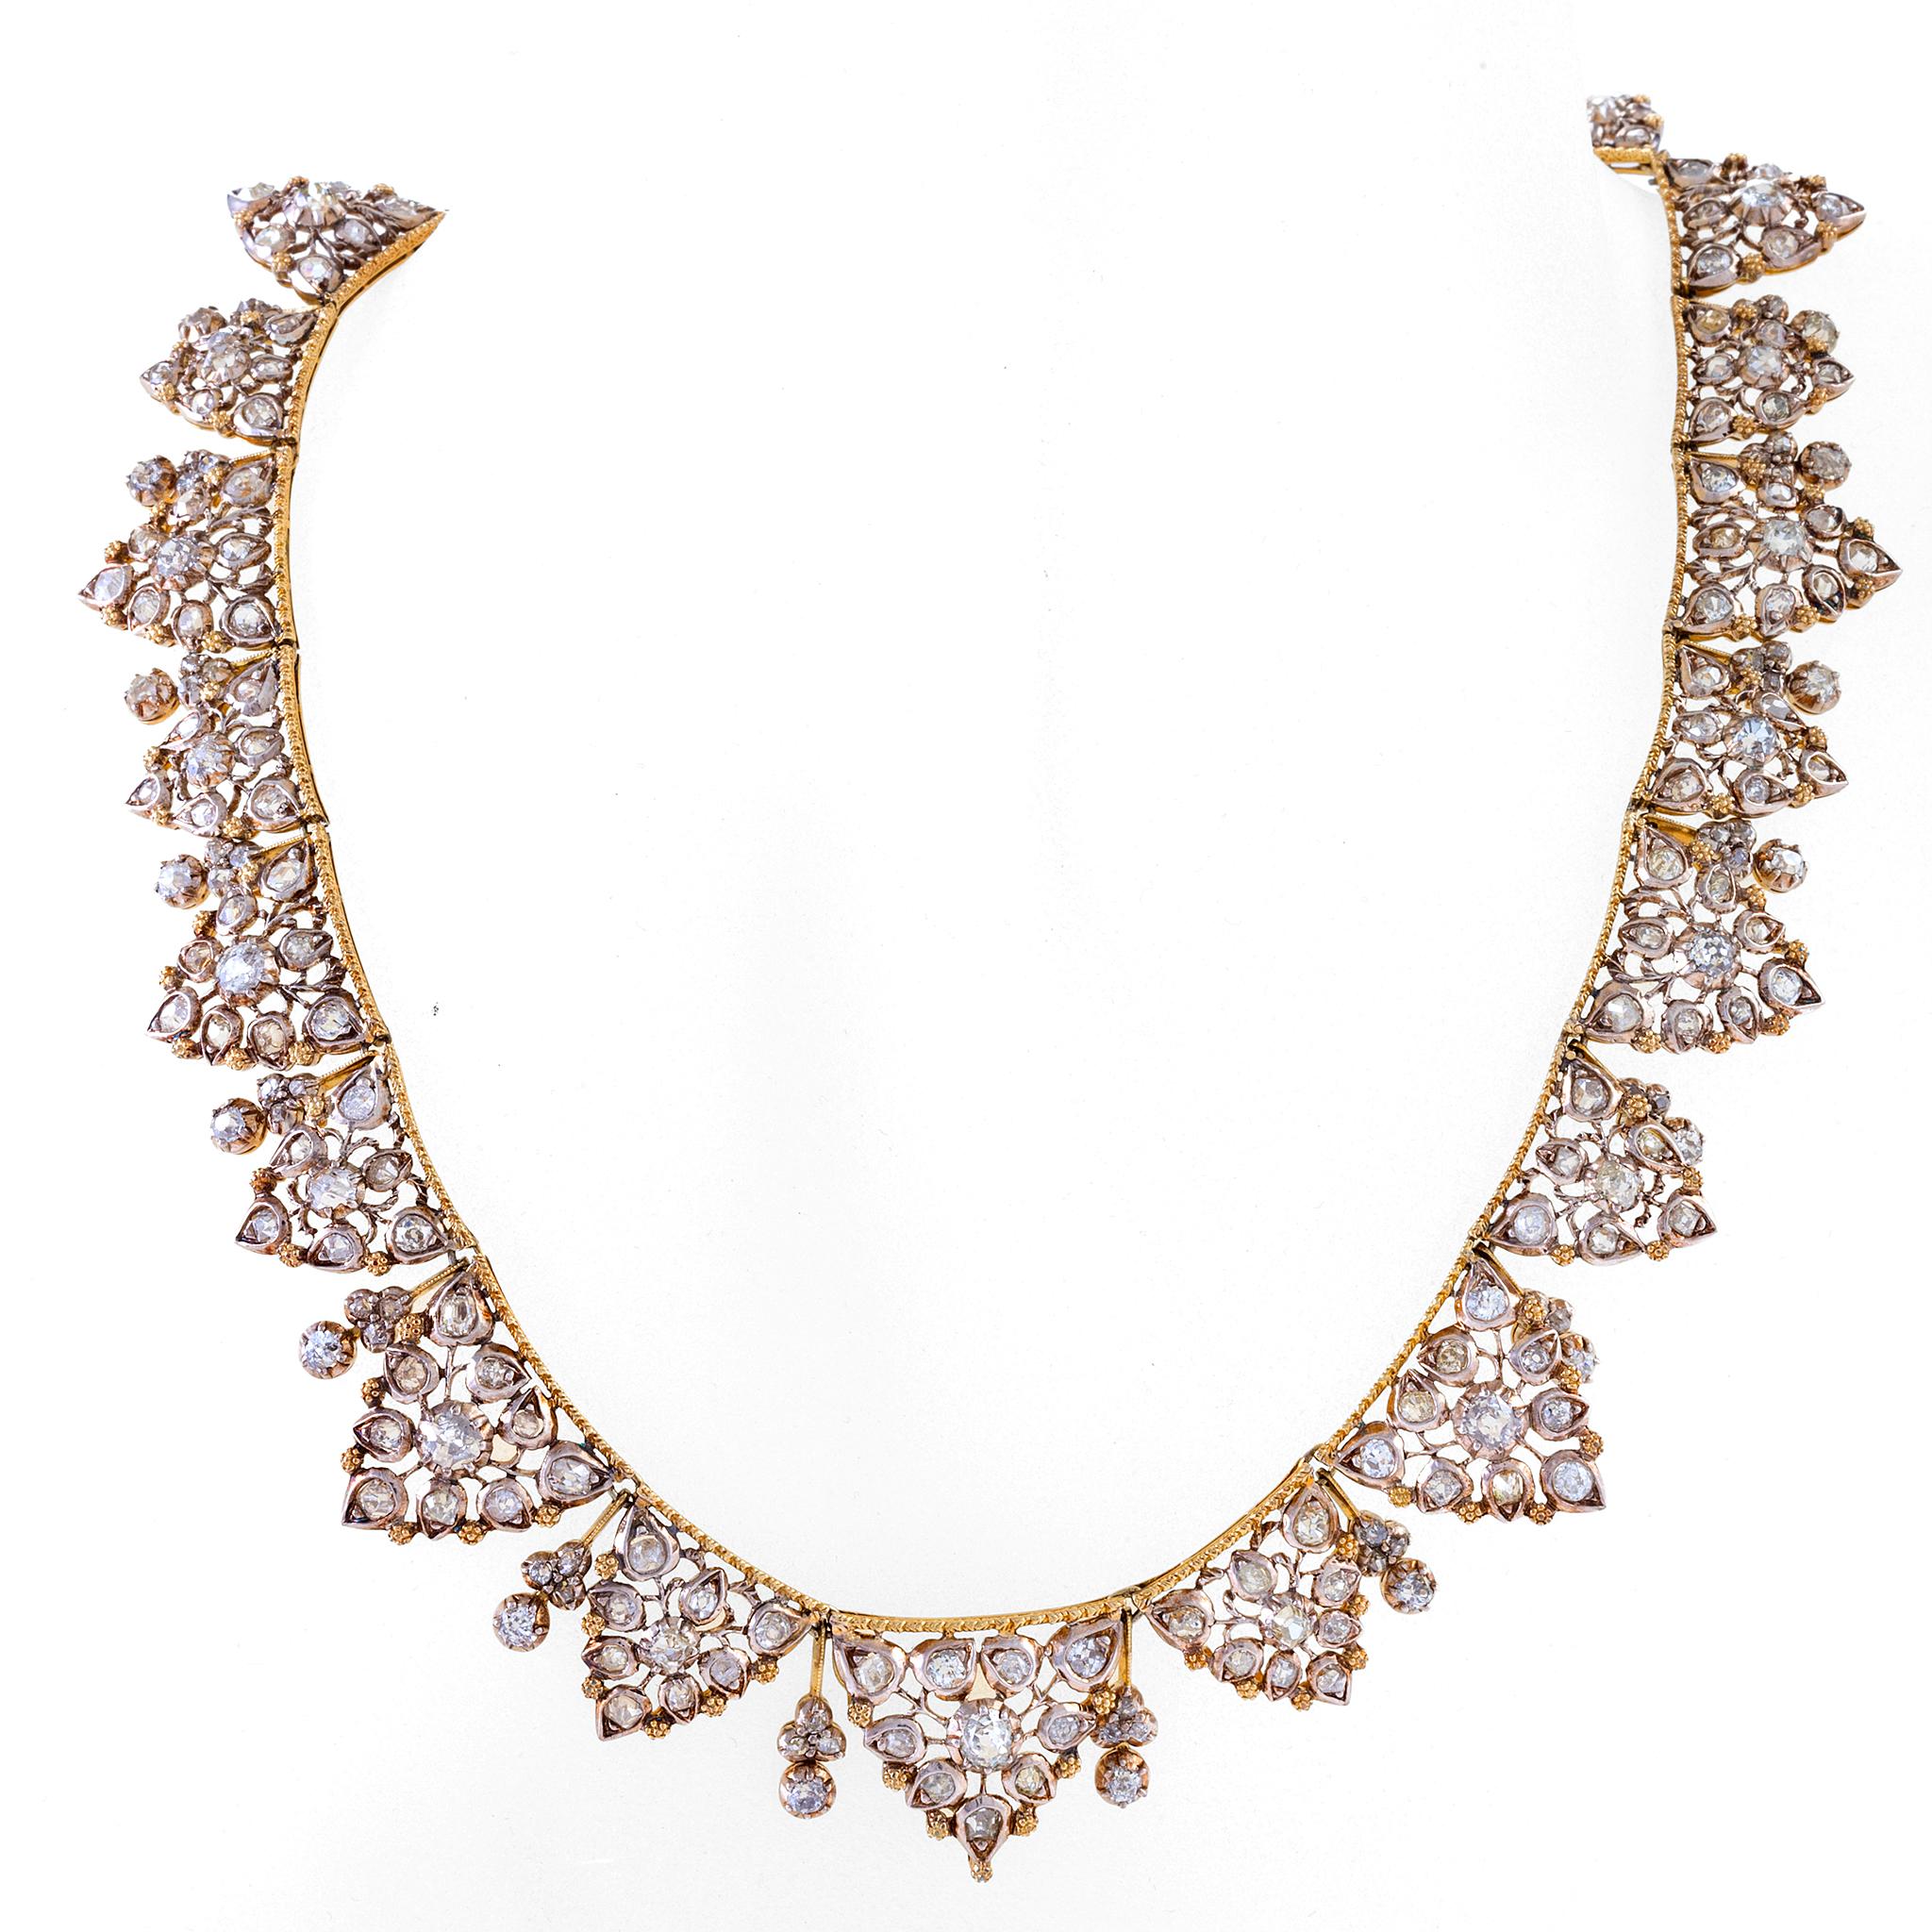 A very fine example of Buccellati’s mid-century jewels, this slightly tapered bi-color gold and diamond leaf necklace is set with nearly three hundred diamonds, weighing almost twenty carats in total. Subtly referencing classical forms, the abstract